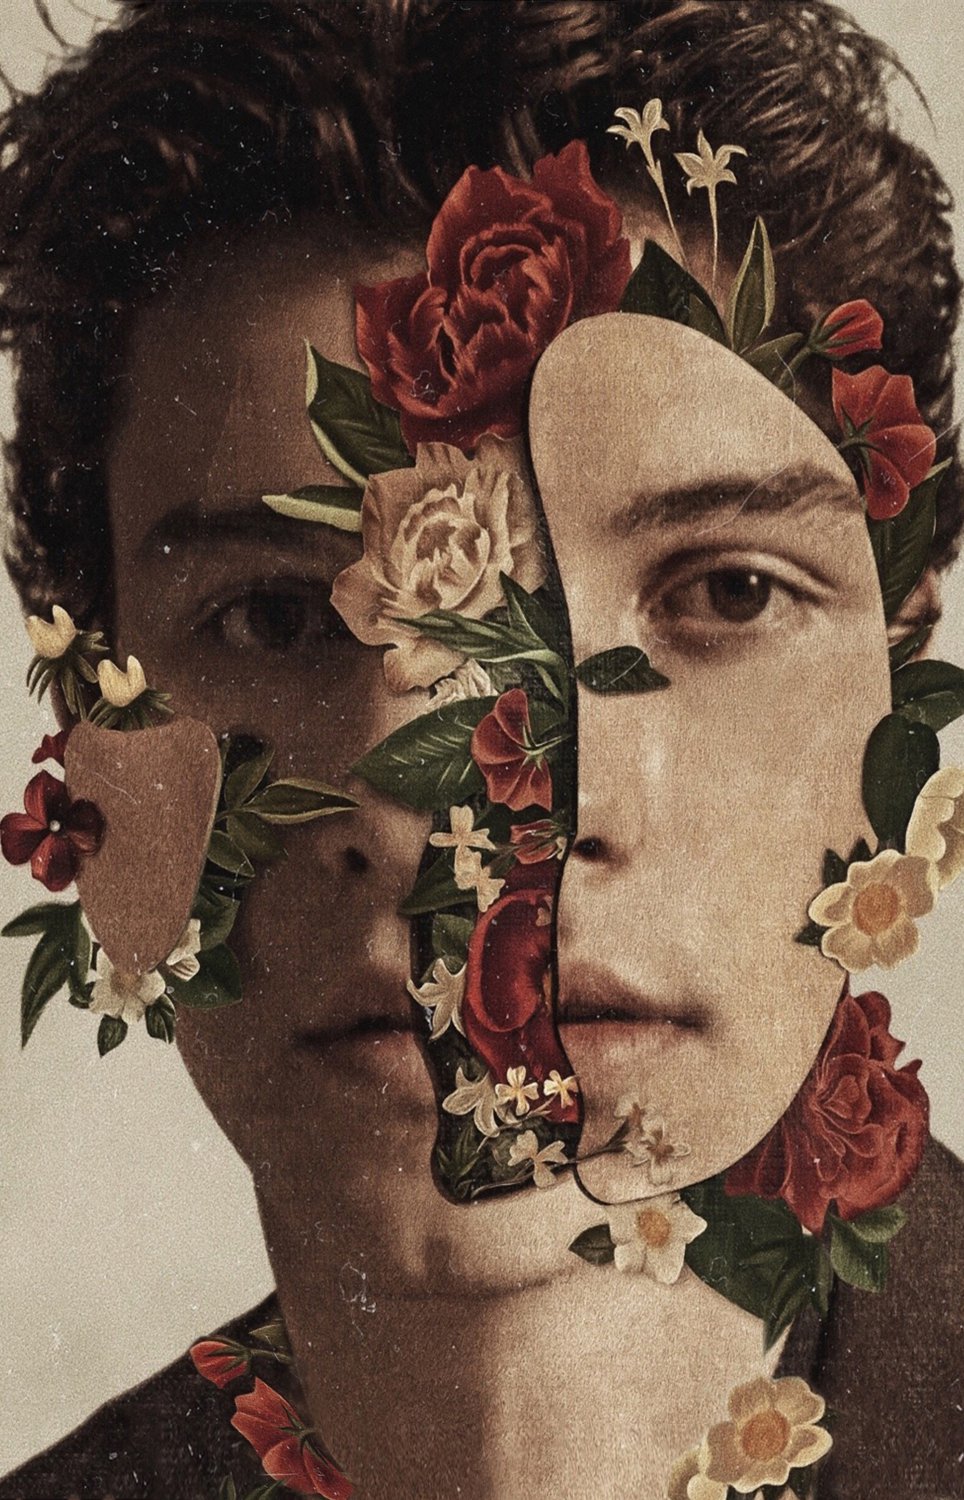 Shawn Mendes   13"x19" (32cm/49cm) Polyester Fabric Poster